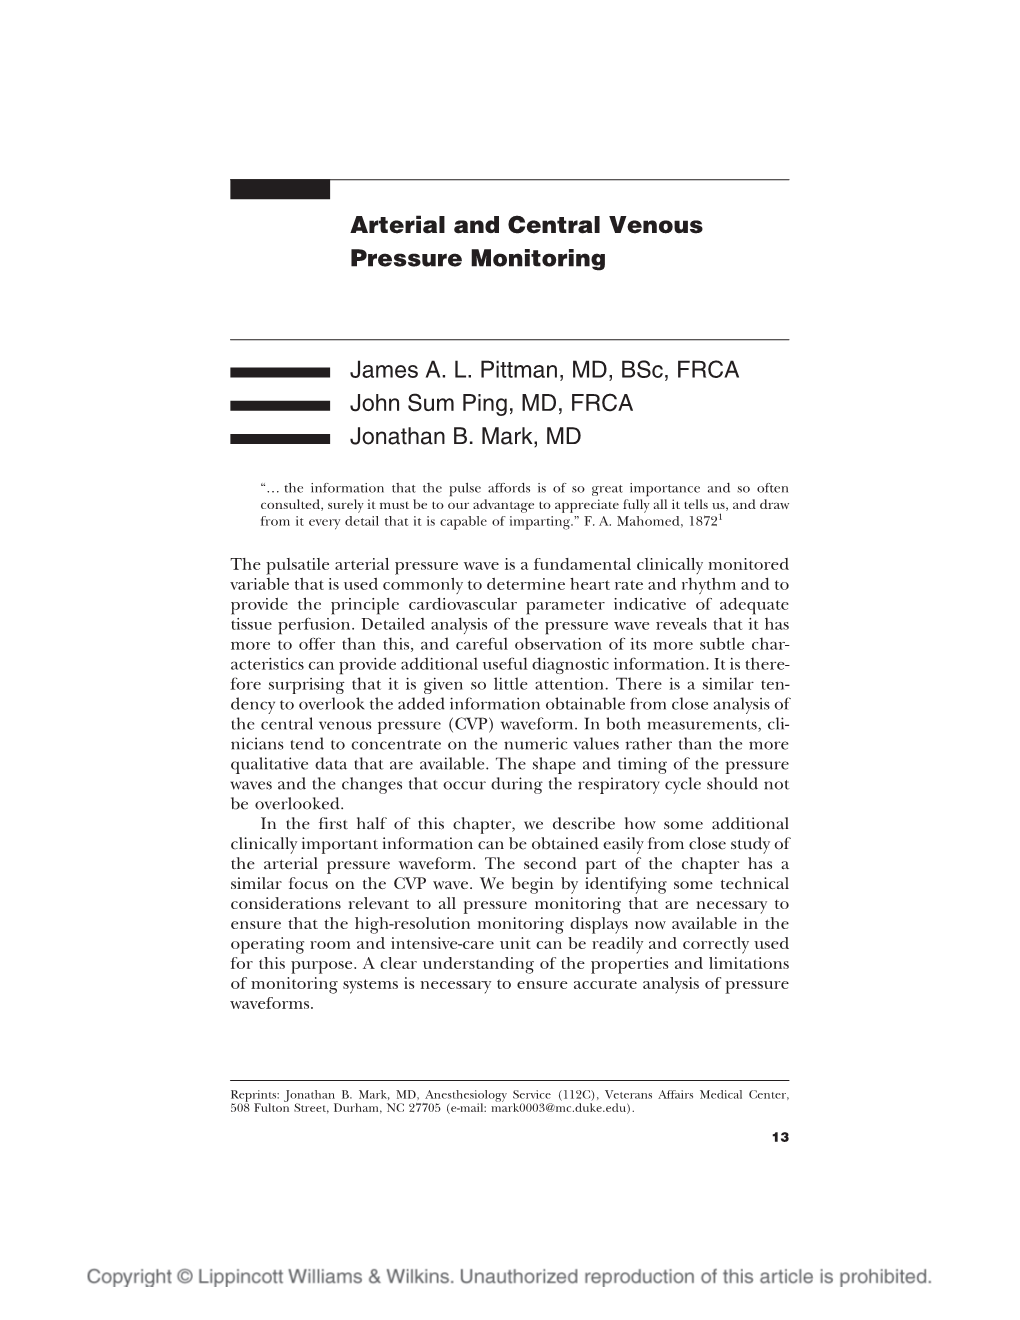 Arterial and Central Venous Pressure Monitoring